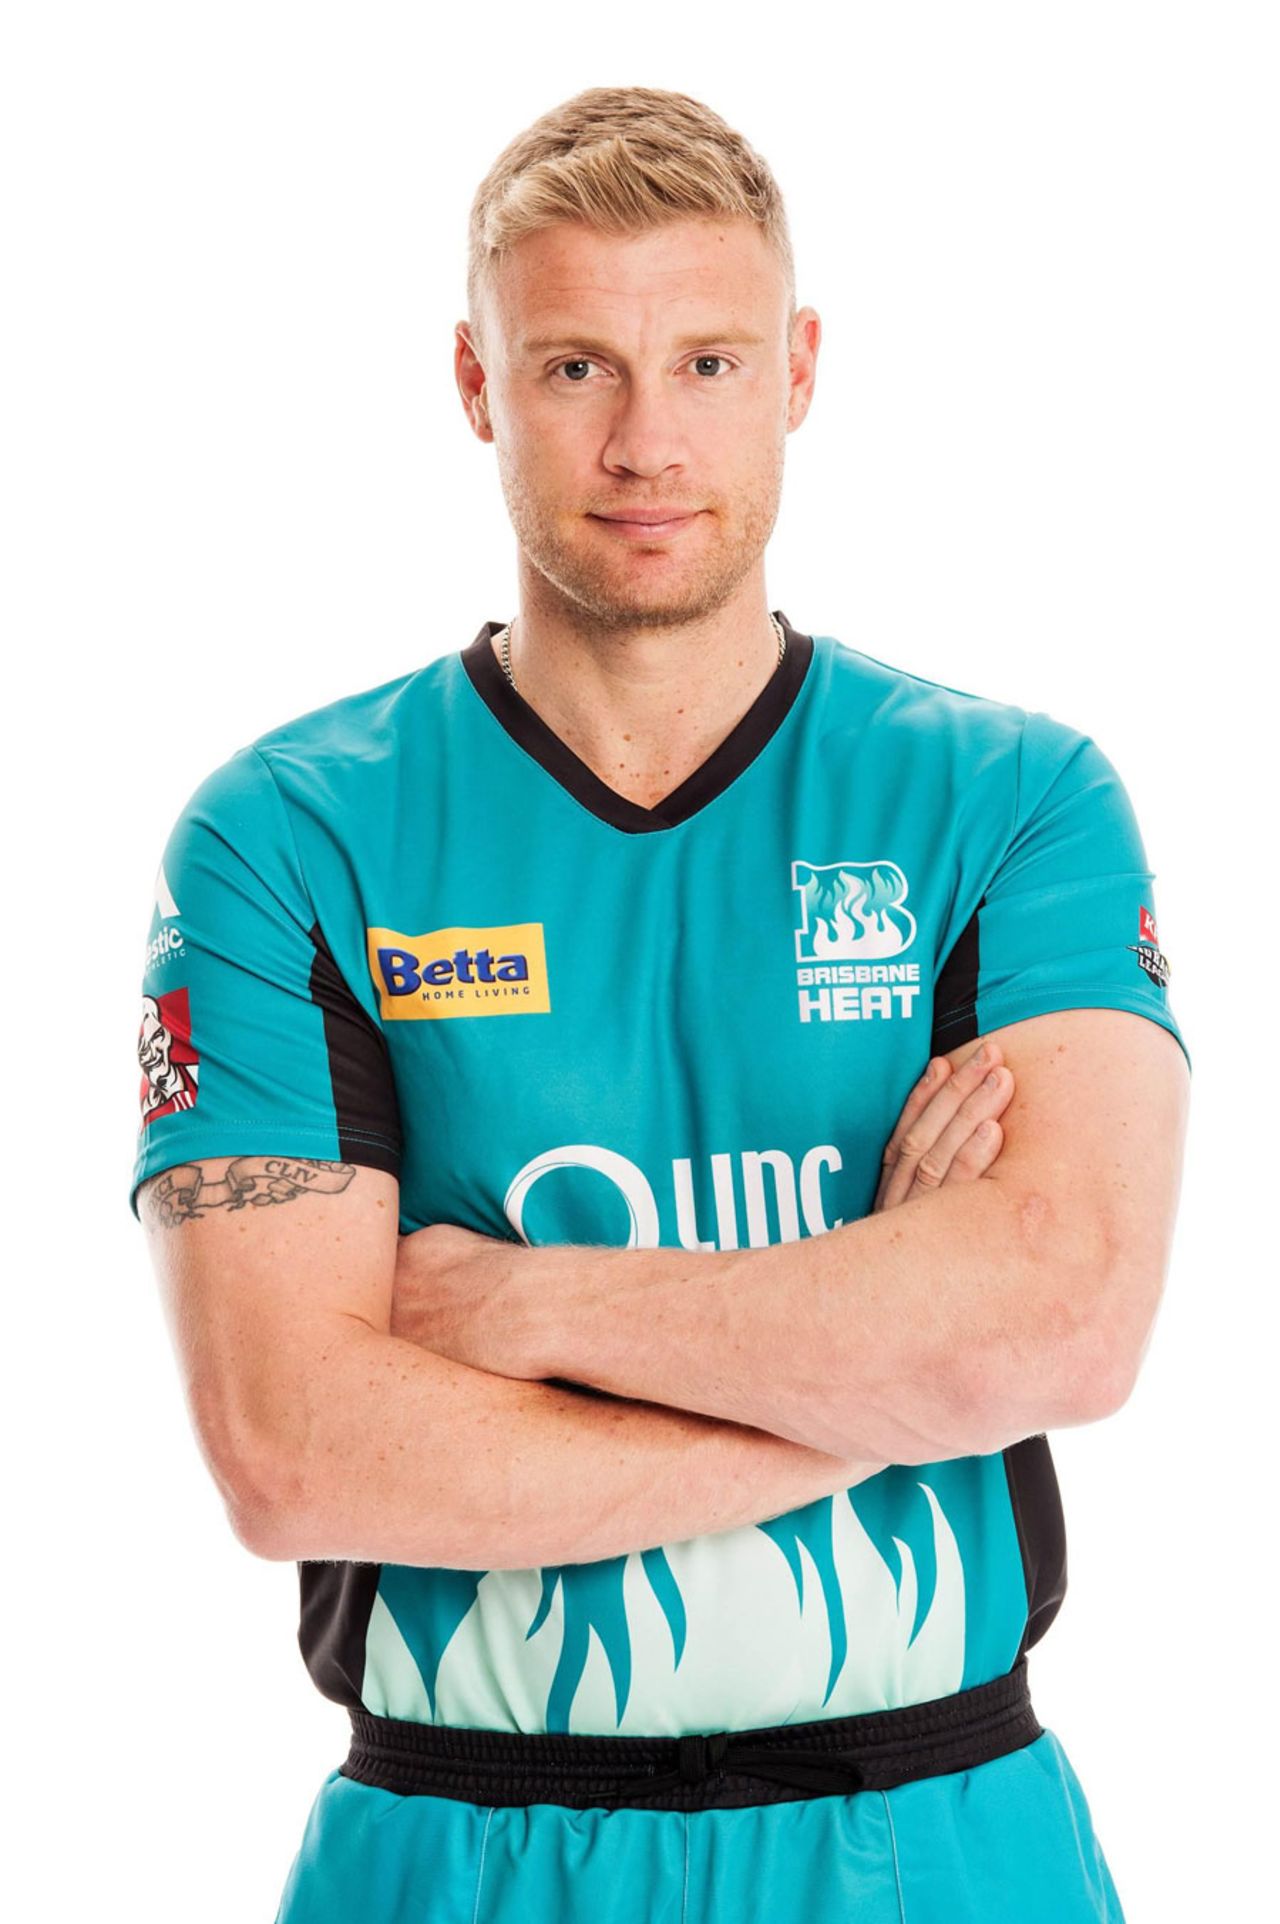 Andrew Flintoff signed with Brisbane Heat for the 2014-15 Big Bash League, October 23, 2014